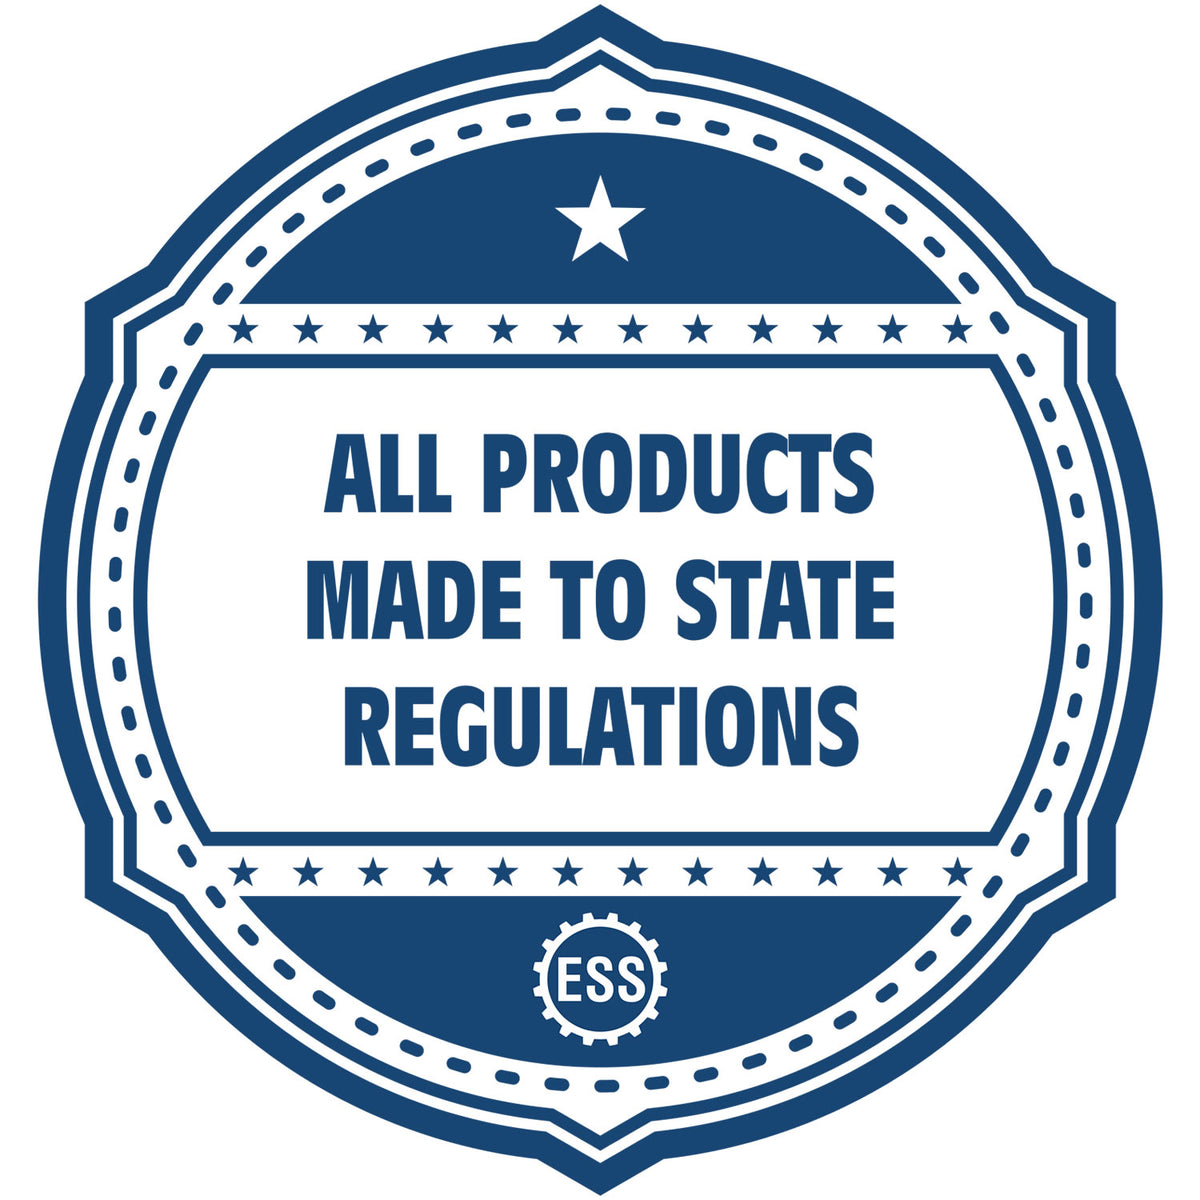 A blue icon or badge for the Hybrid Ohio Geologist Seal showing that this product is made in compliance with state regulations.